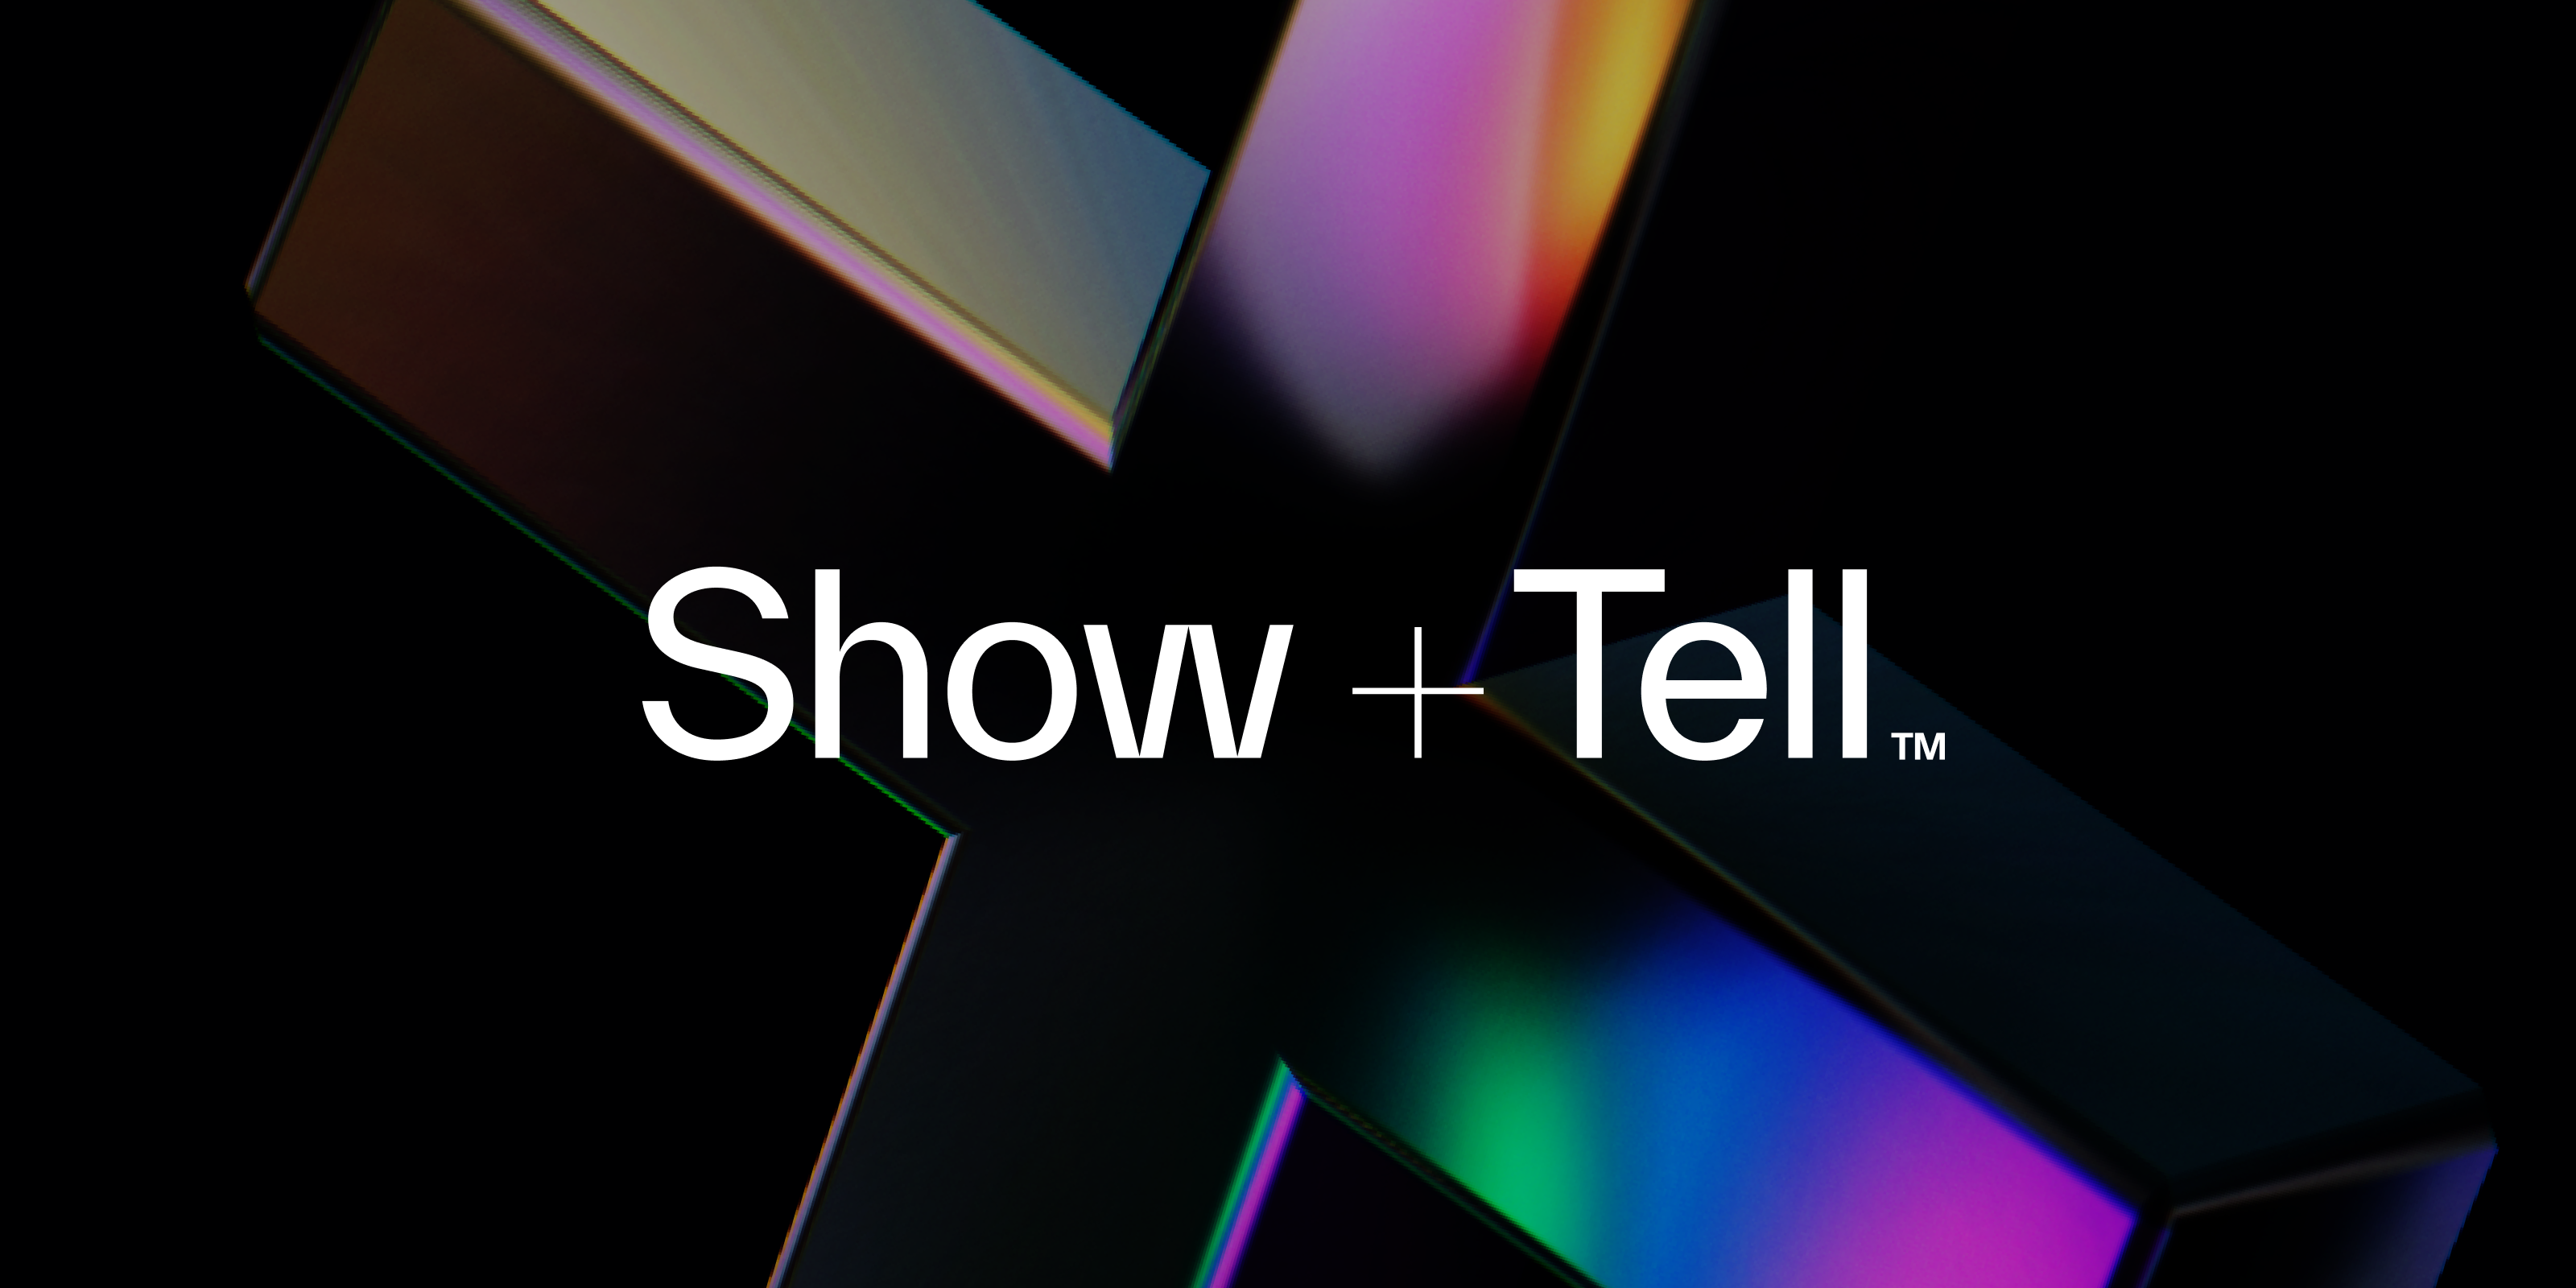 Show + Tell